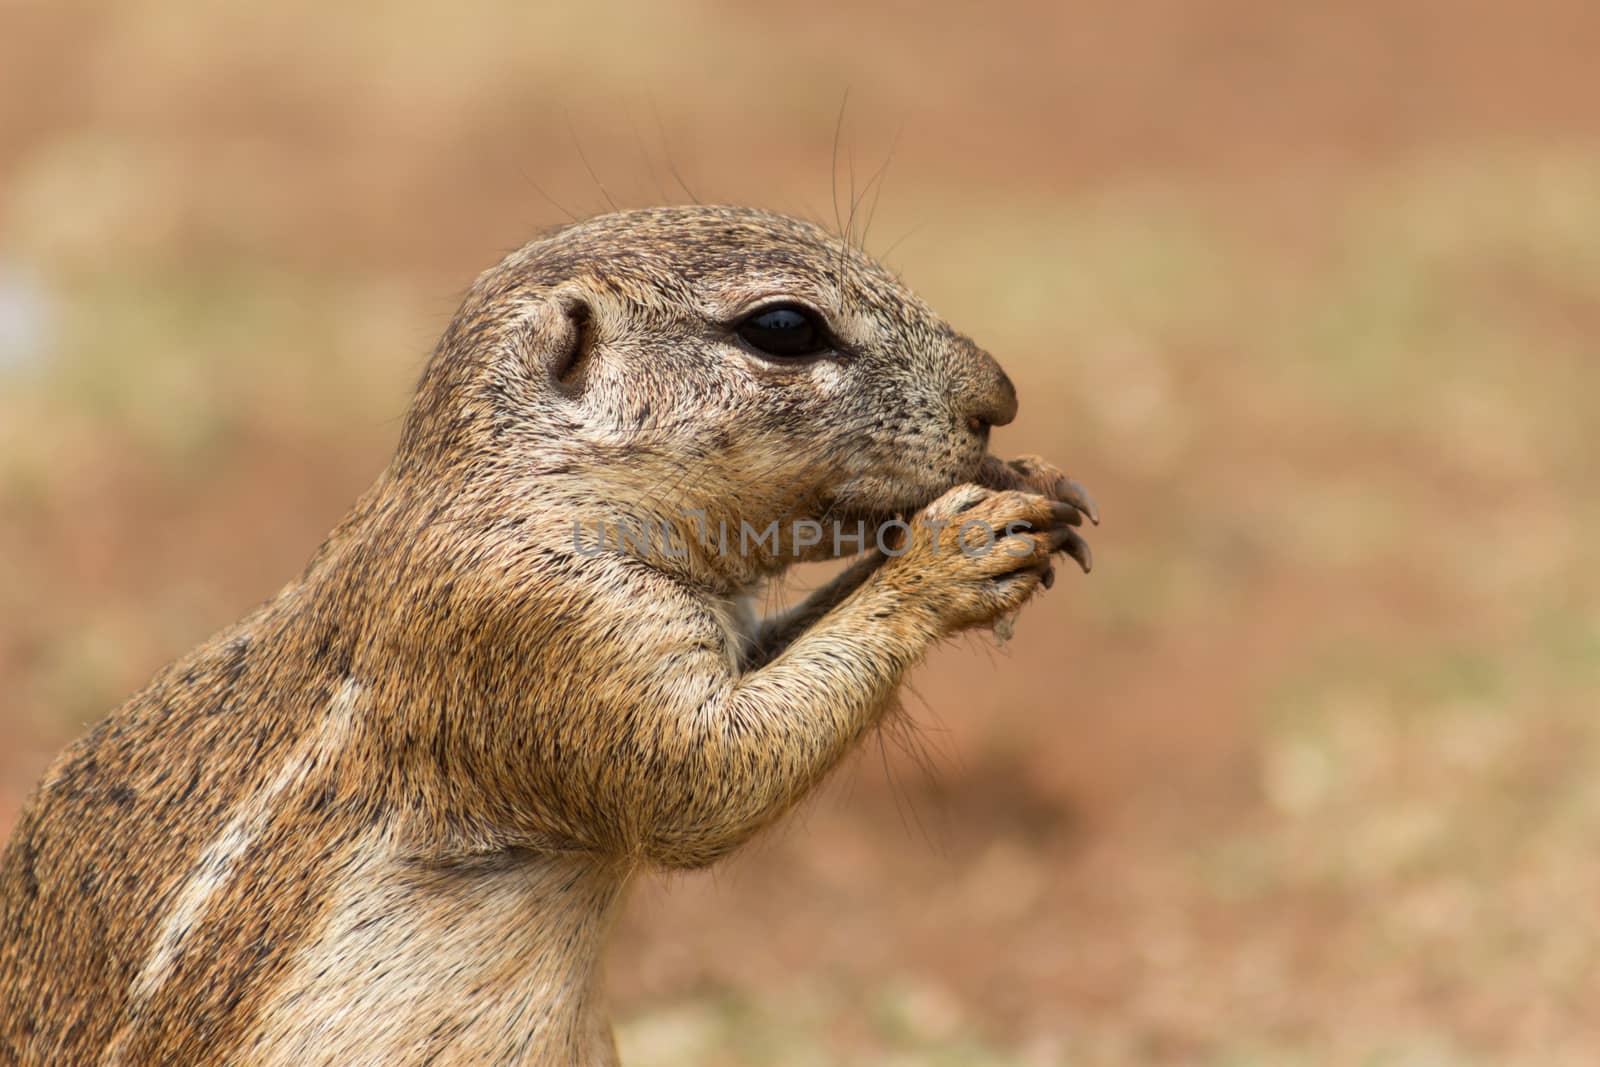 African ground squirrel (Marmotini) closeup portrait eating a nut